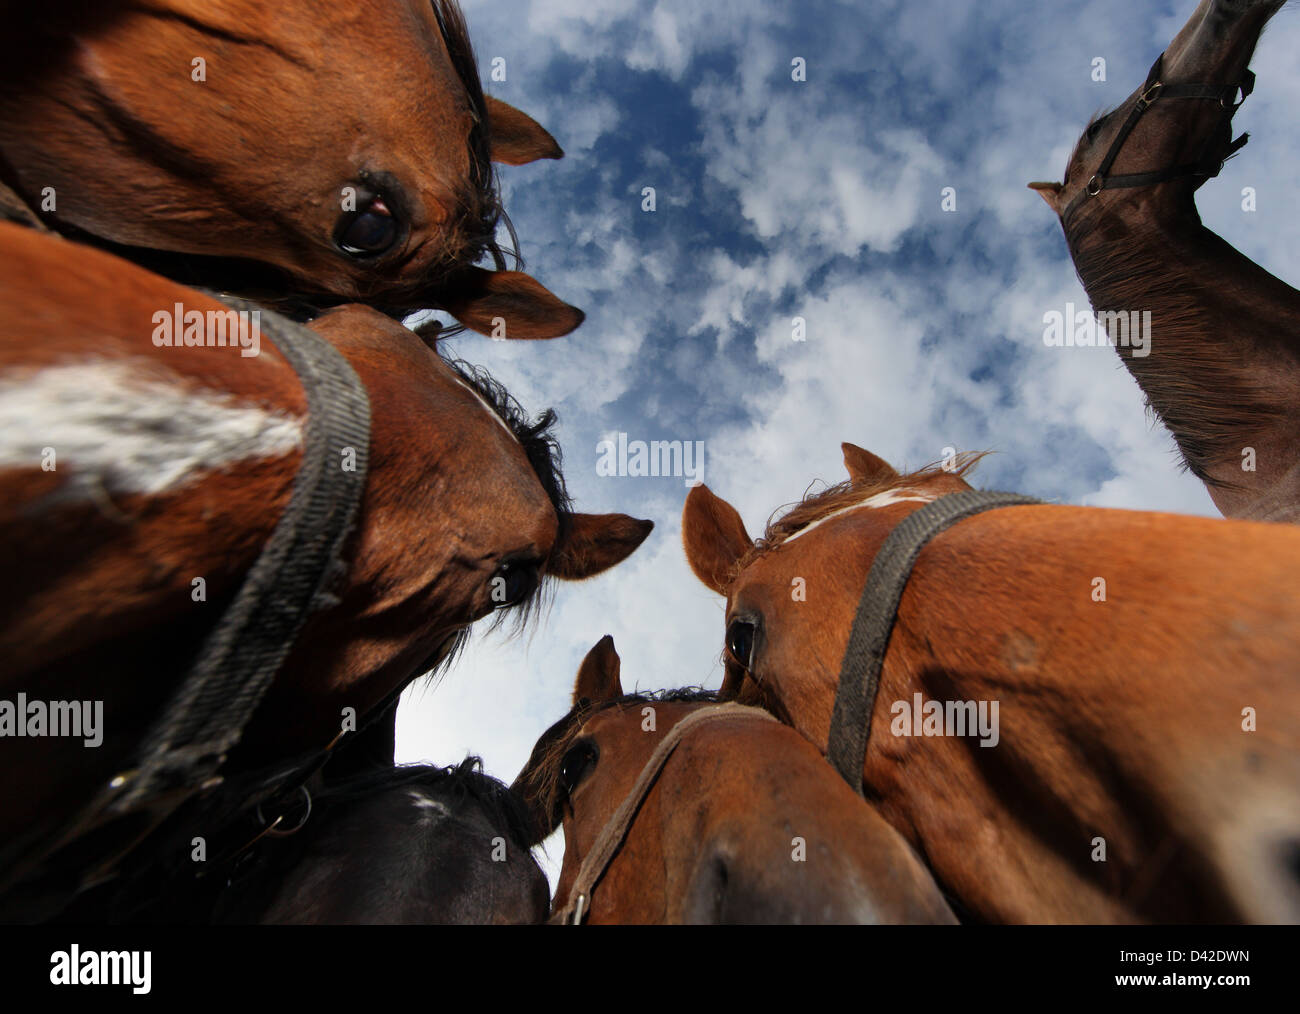 Görlsdorf, Germany, horses from the frog perspective in portrait Stock Photo